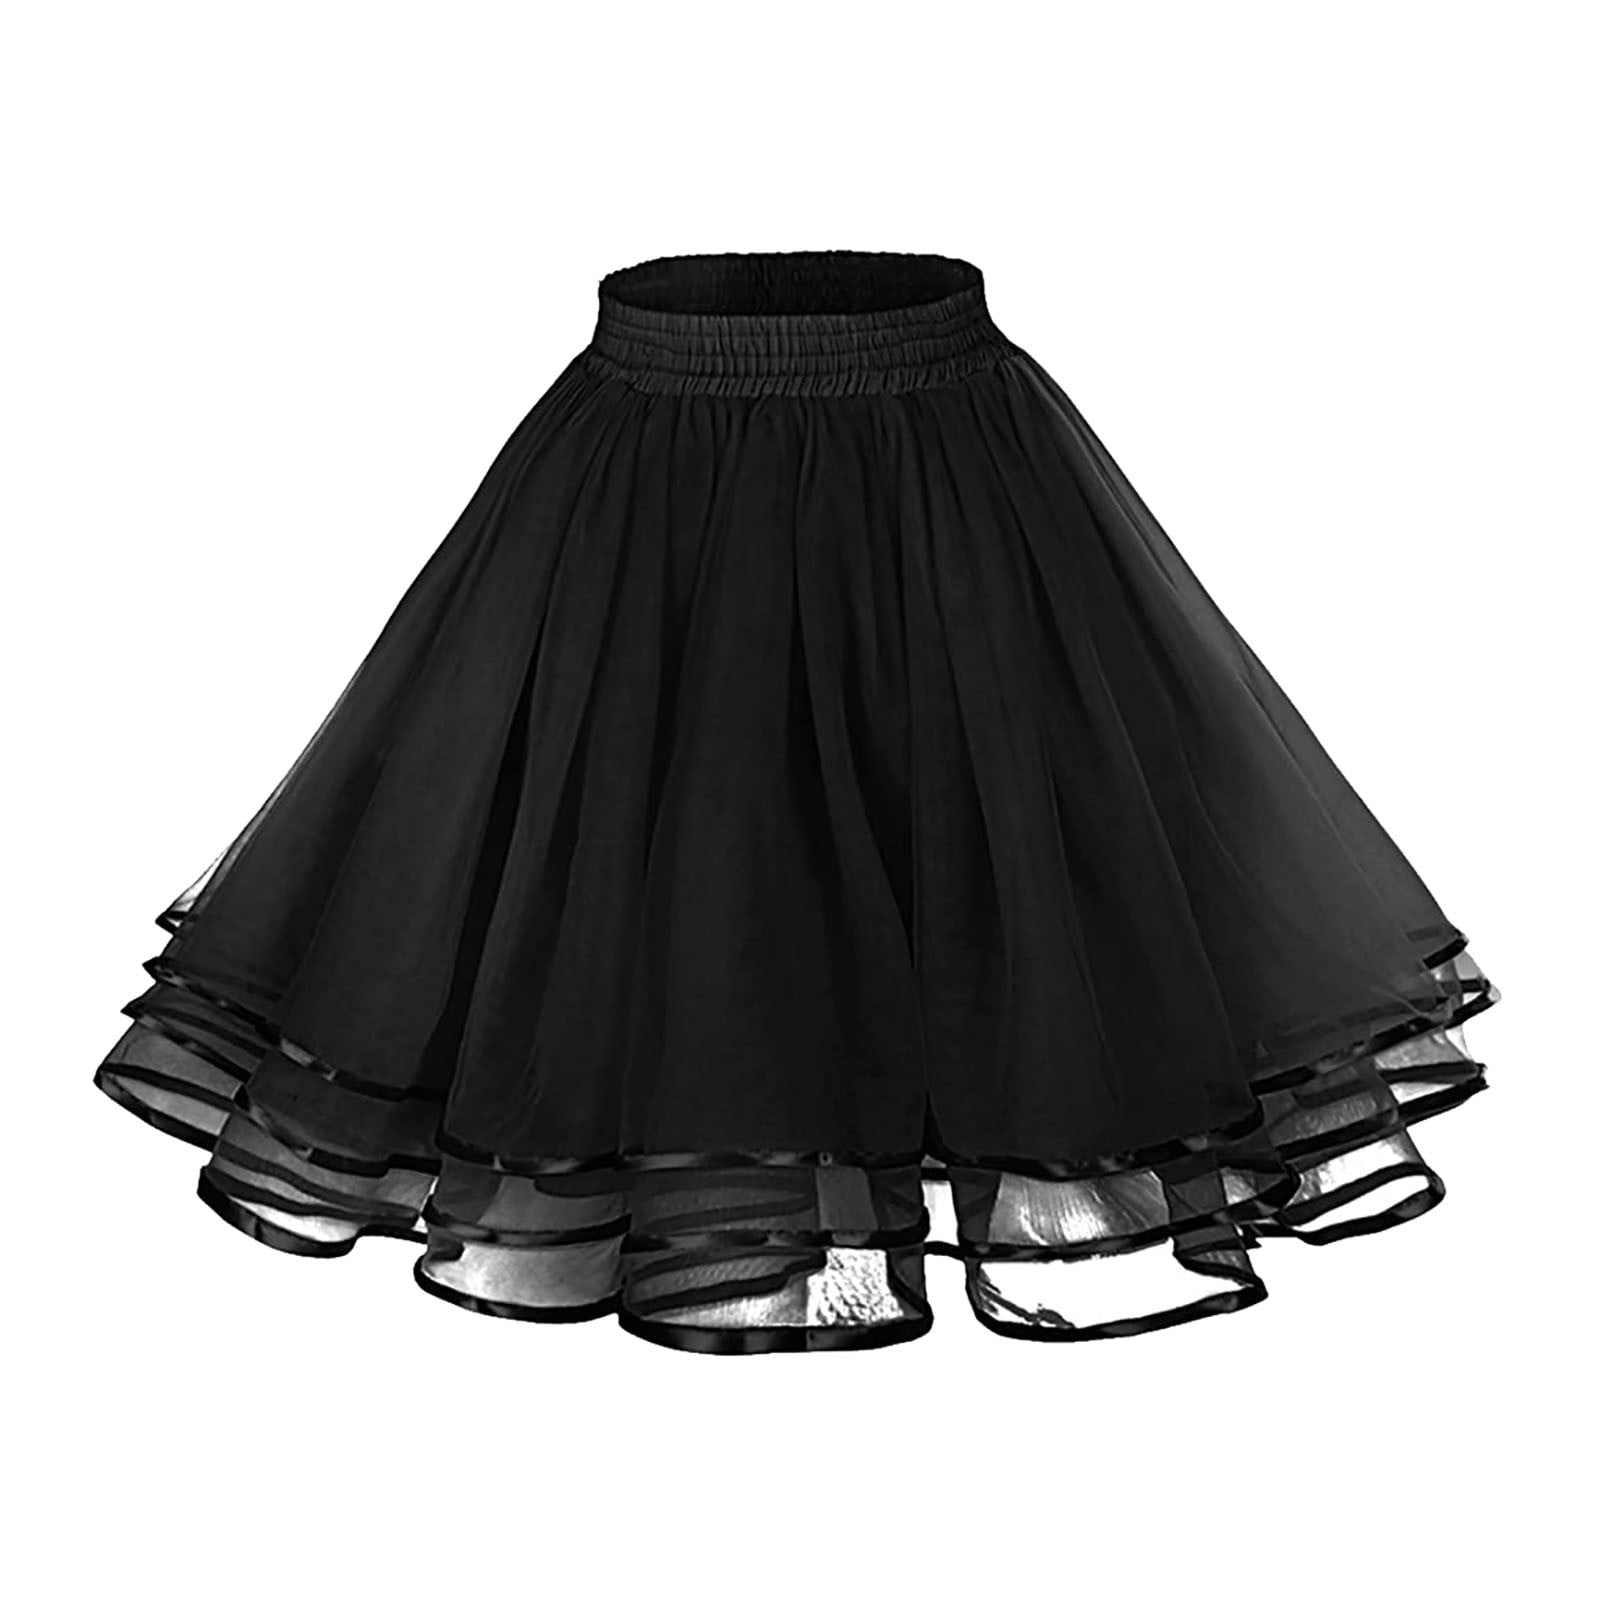 Pants up pointed petticoat